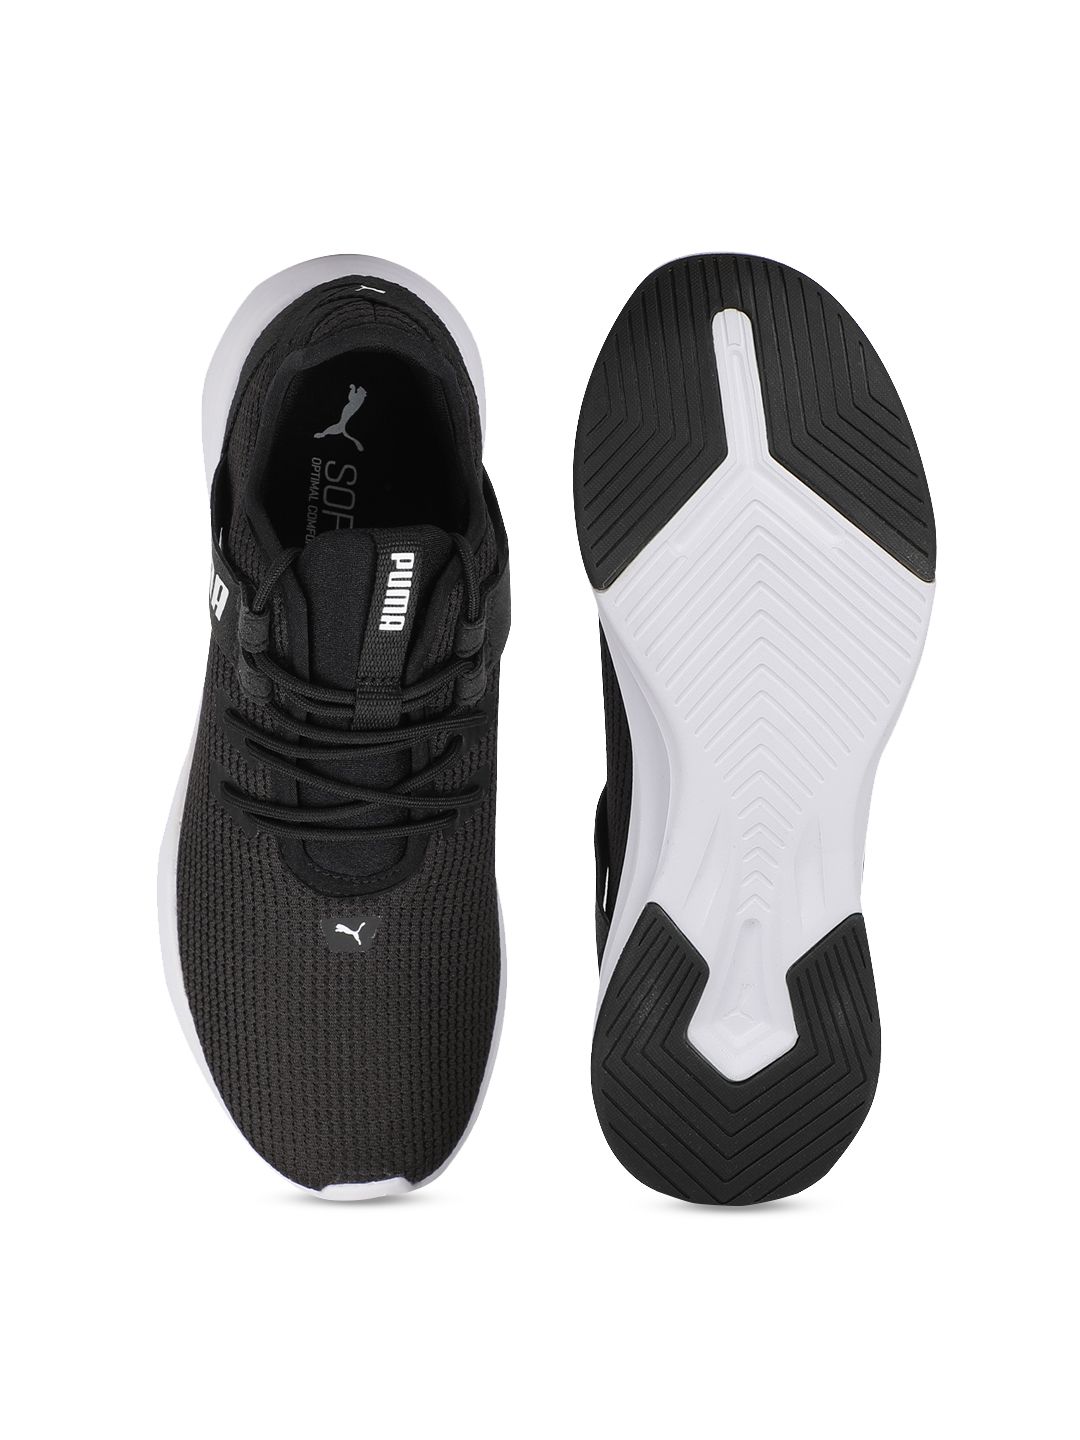 Puma Women Black Training or Gym Shoes Price in India